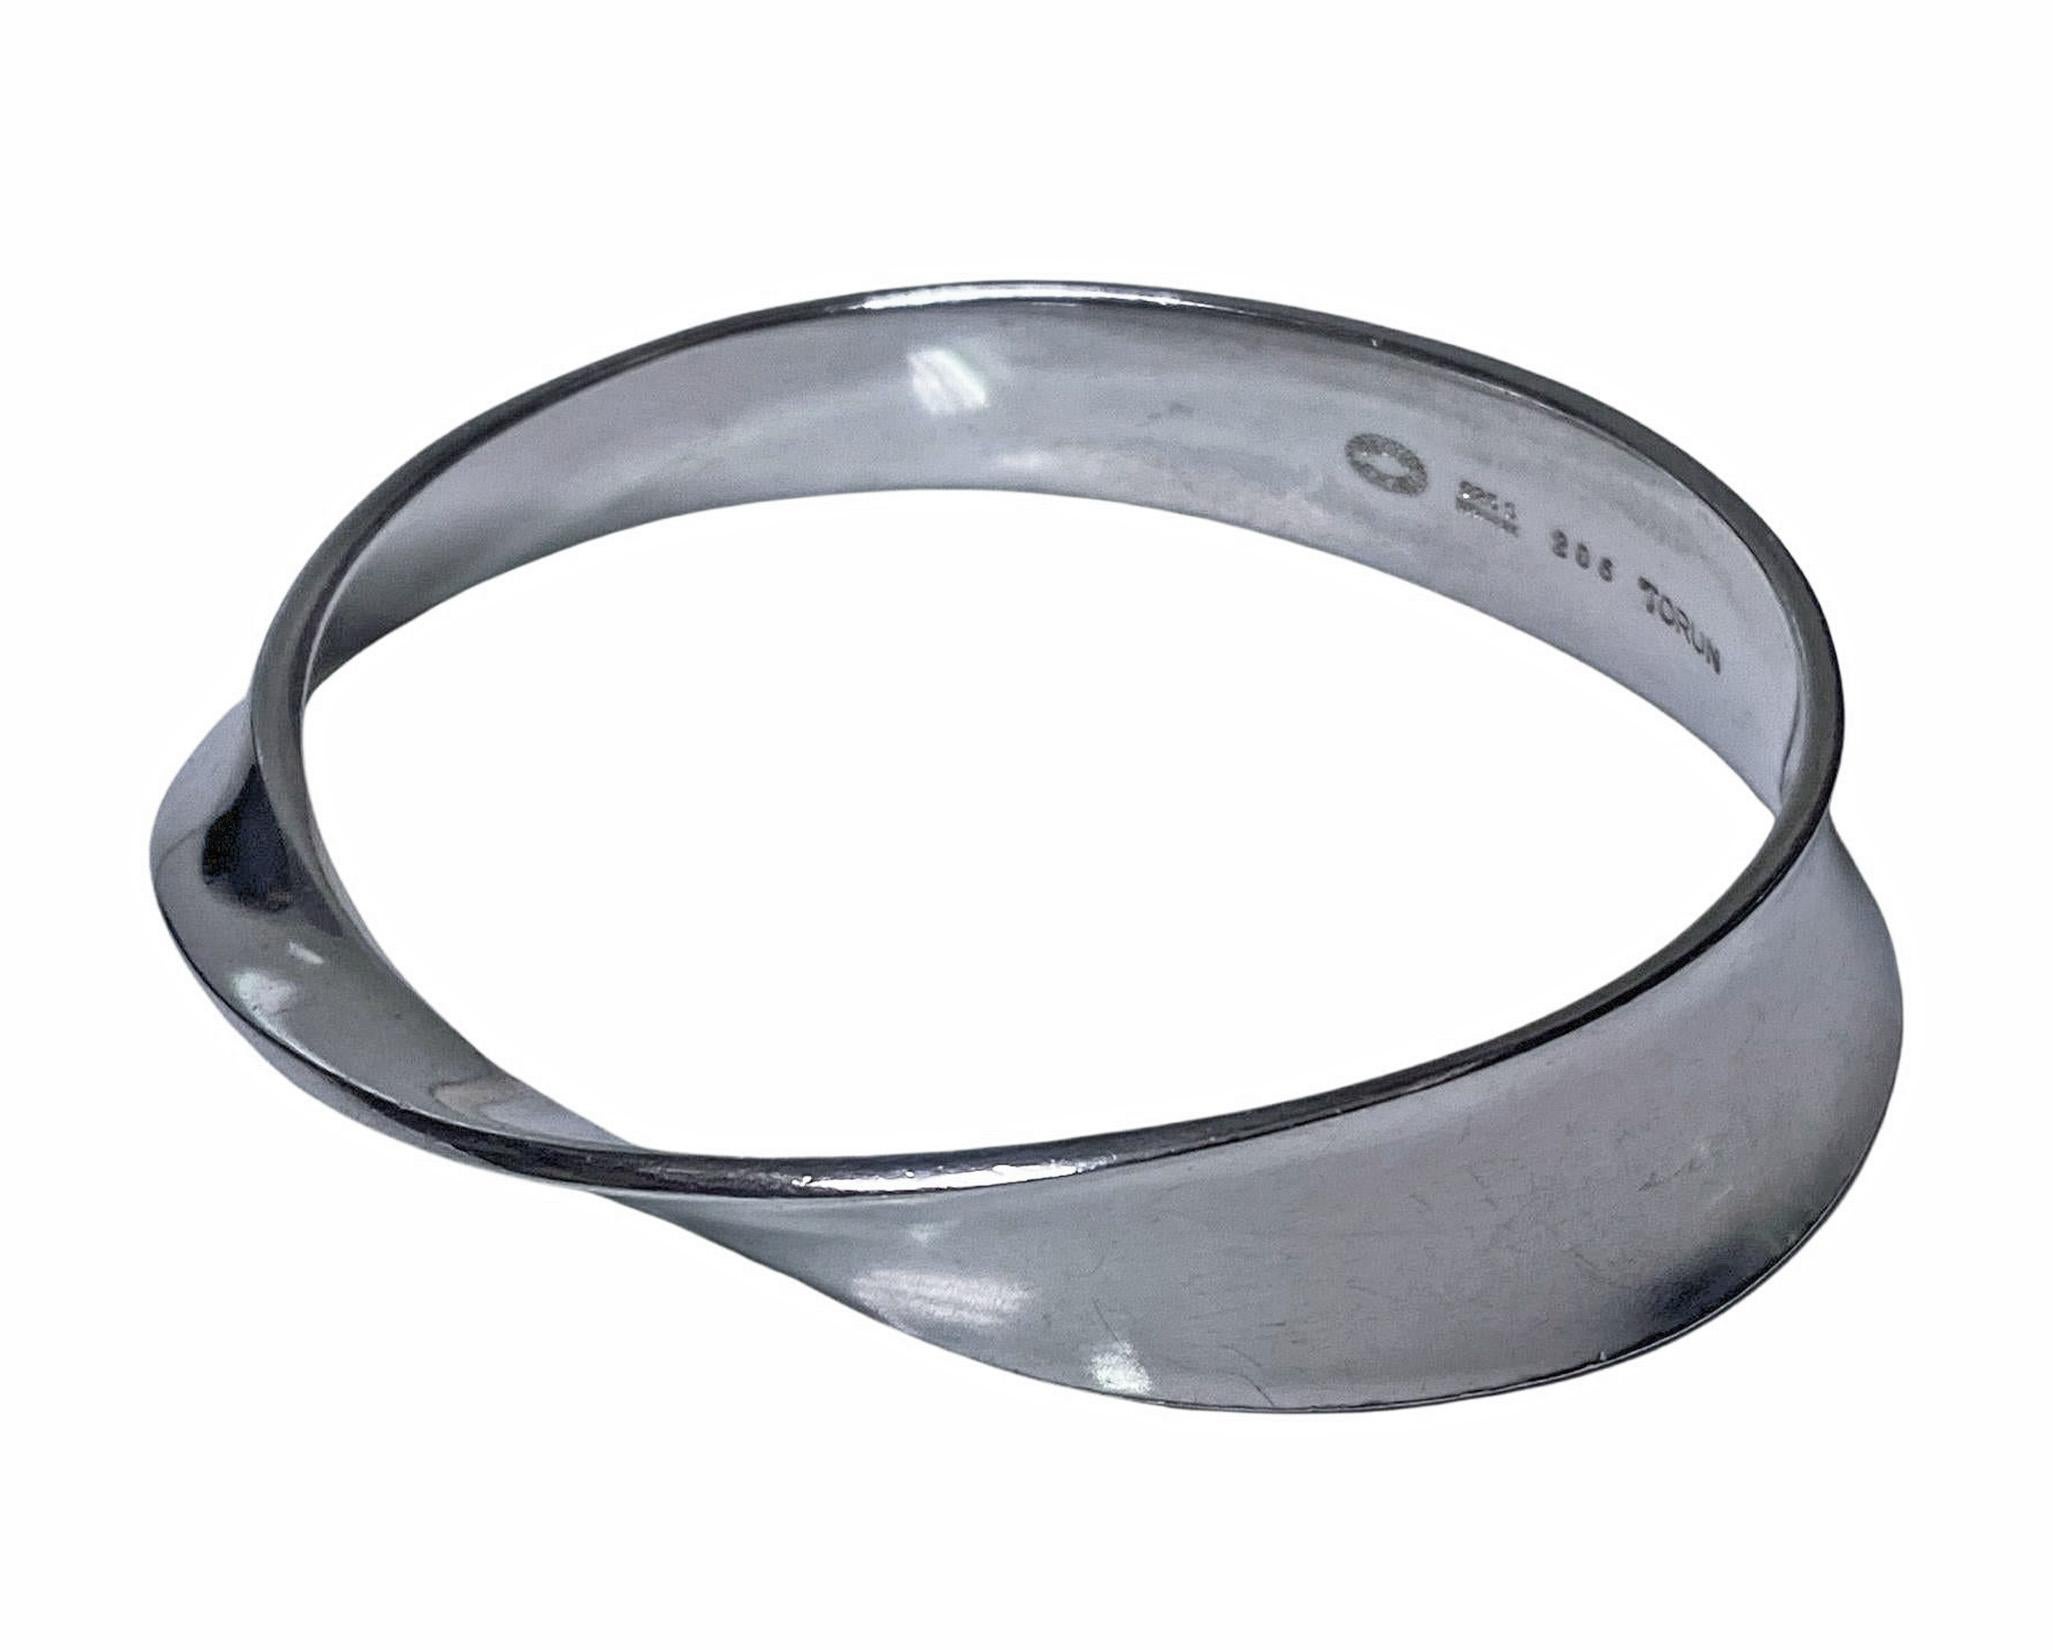 Georg Jensen Torun Bulow-Hube Sterling Mobius Bangle Denmark, #206, C.1980. Stamped Georg Jensen in a dotted oval, Denmark, 925S, 206, and Torun. Medium - large size… Will fit a 7.00- 7.50 inch wrist. Interior dimensions. 7.50 x 5.80 cm, 3.00 x 2.30